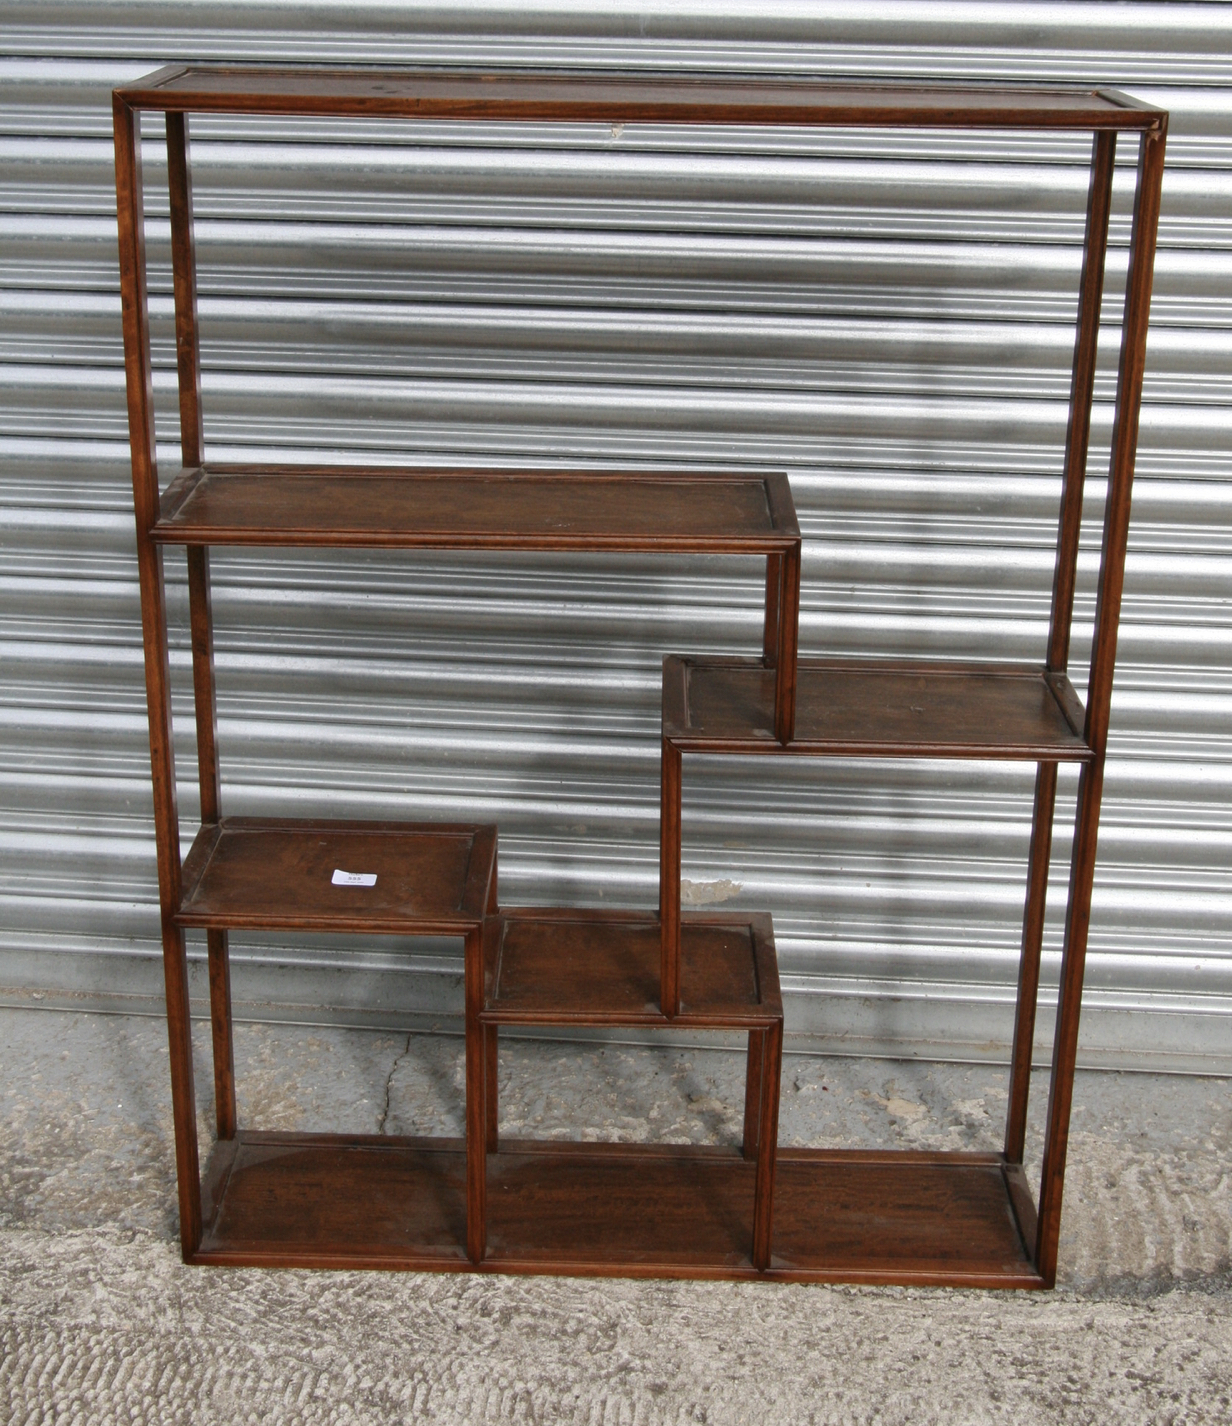 Chinese hardwood multi-tier display stand - Image 5 of 8